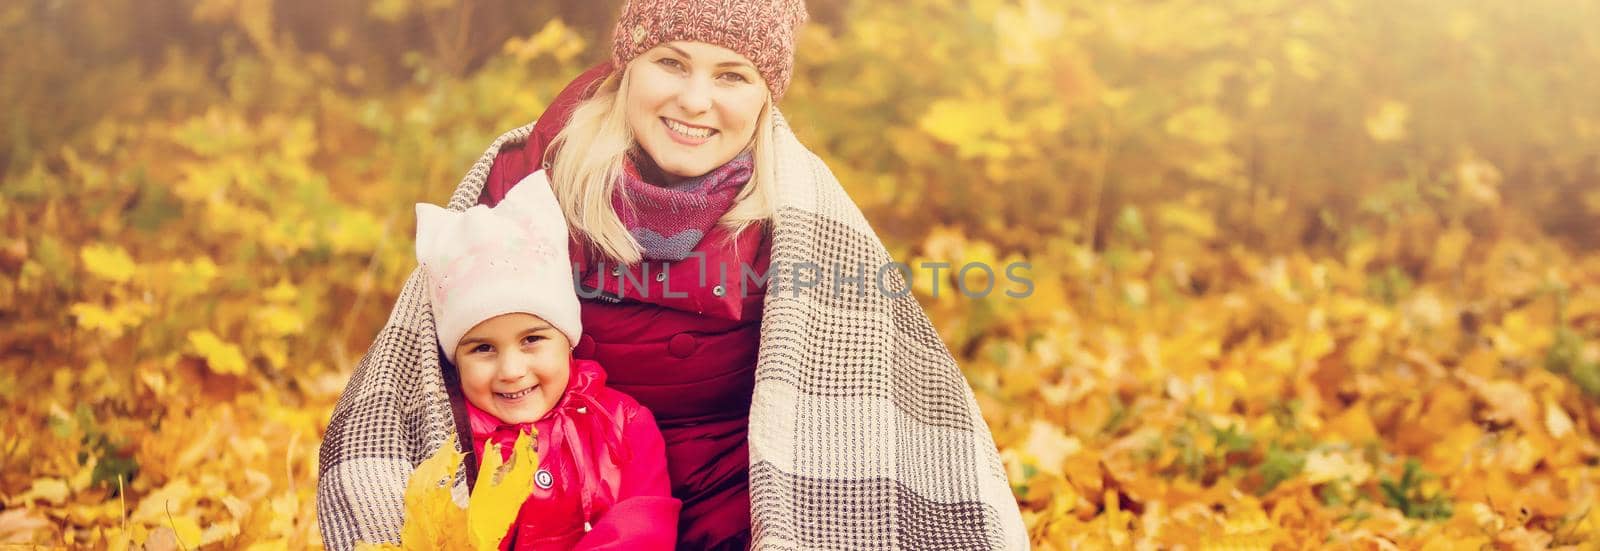 Mother and child hands drink tea in the autumn park in the middle of the orange fallen leaves